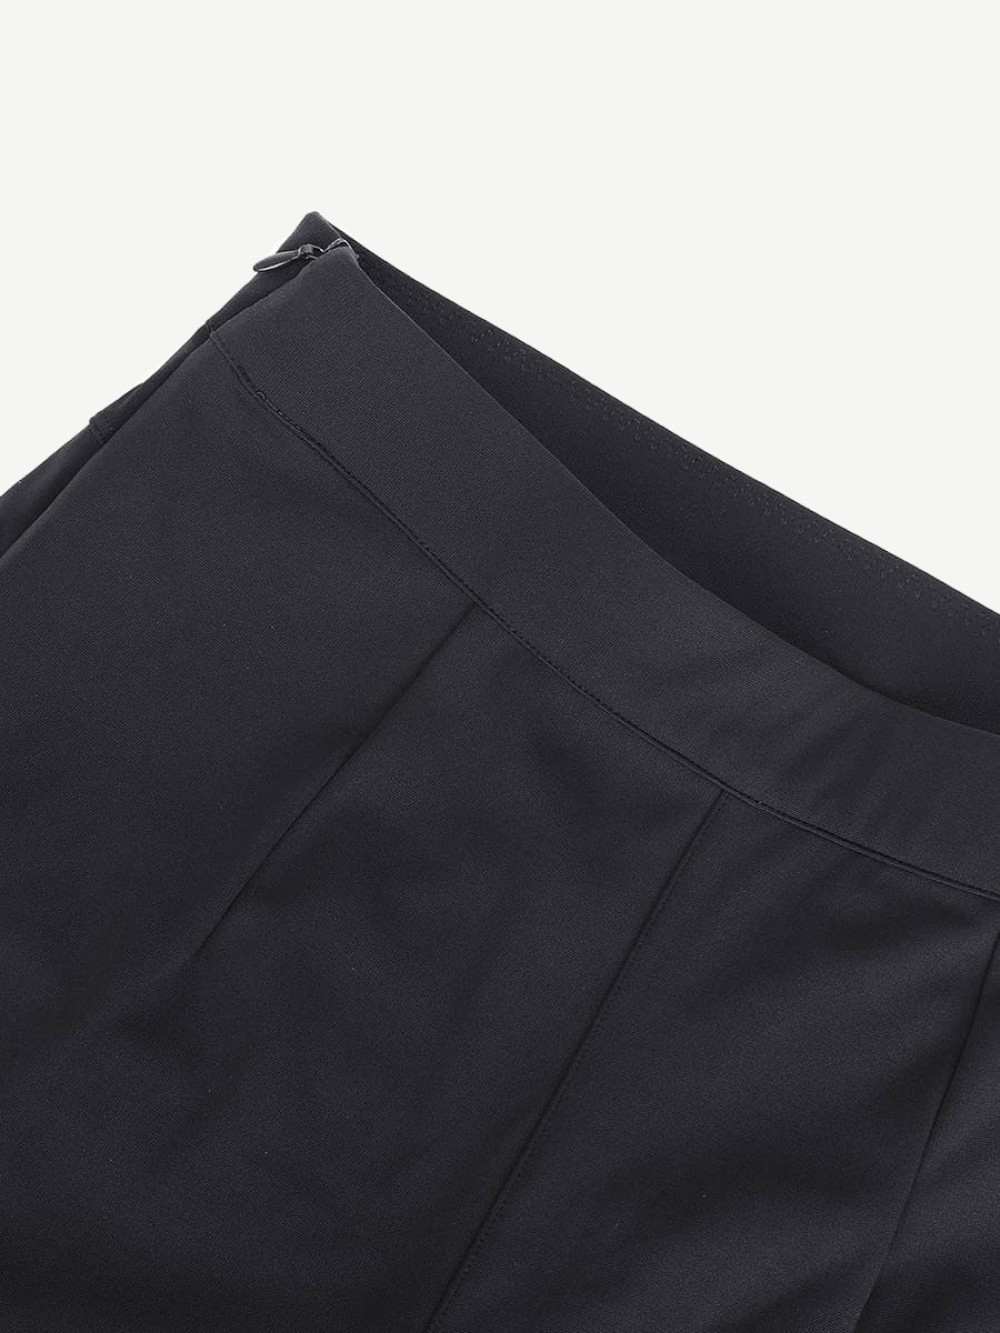 Fashion Waist Trimming Straight-leg pants with Built-in Shaping Shorts